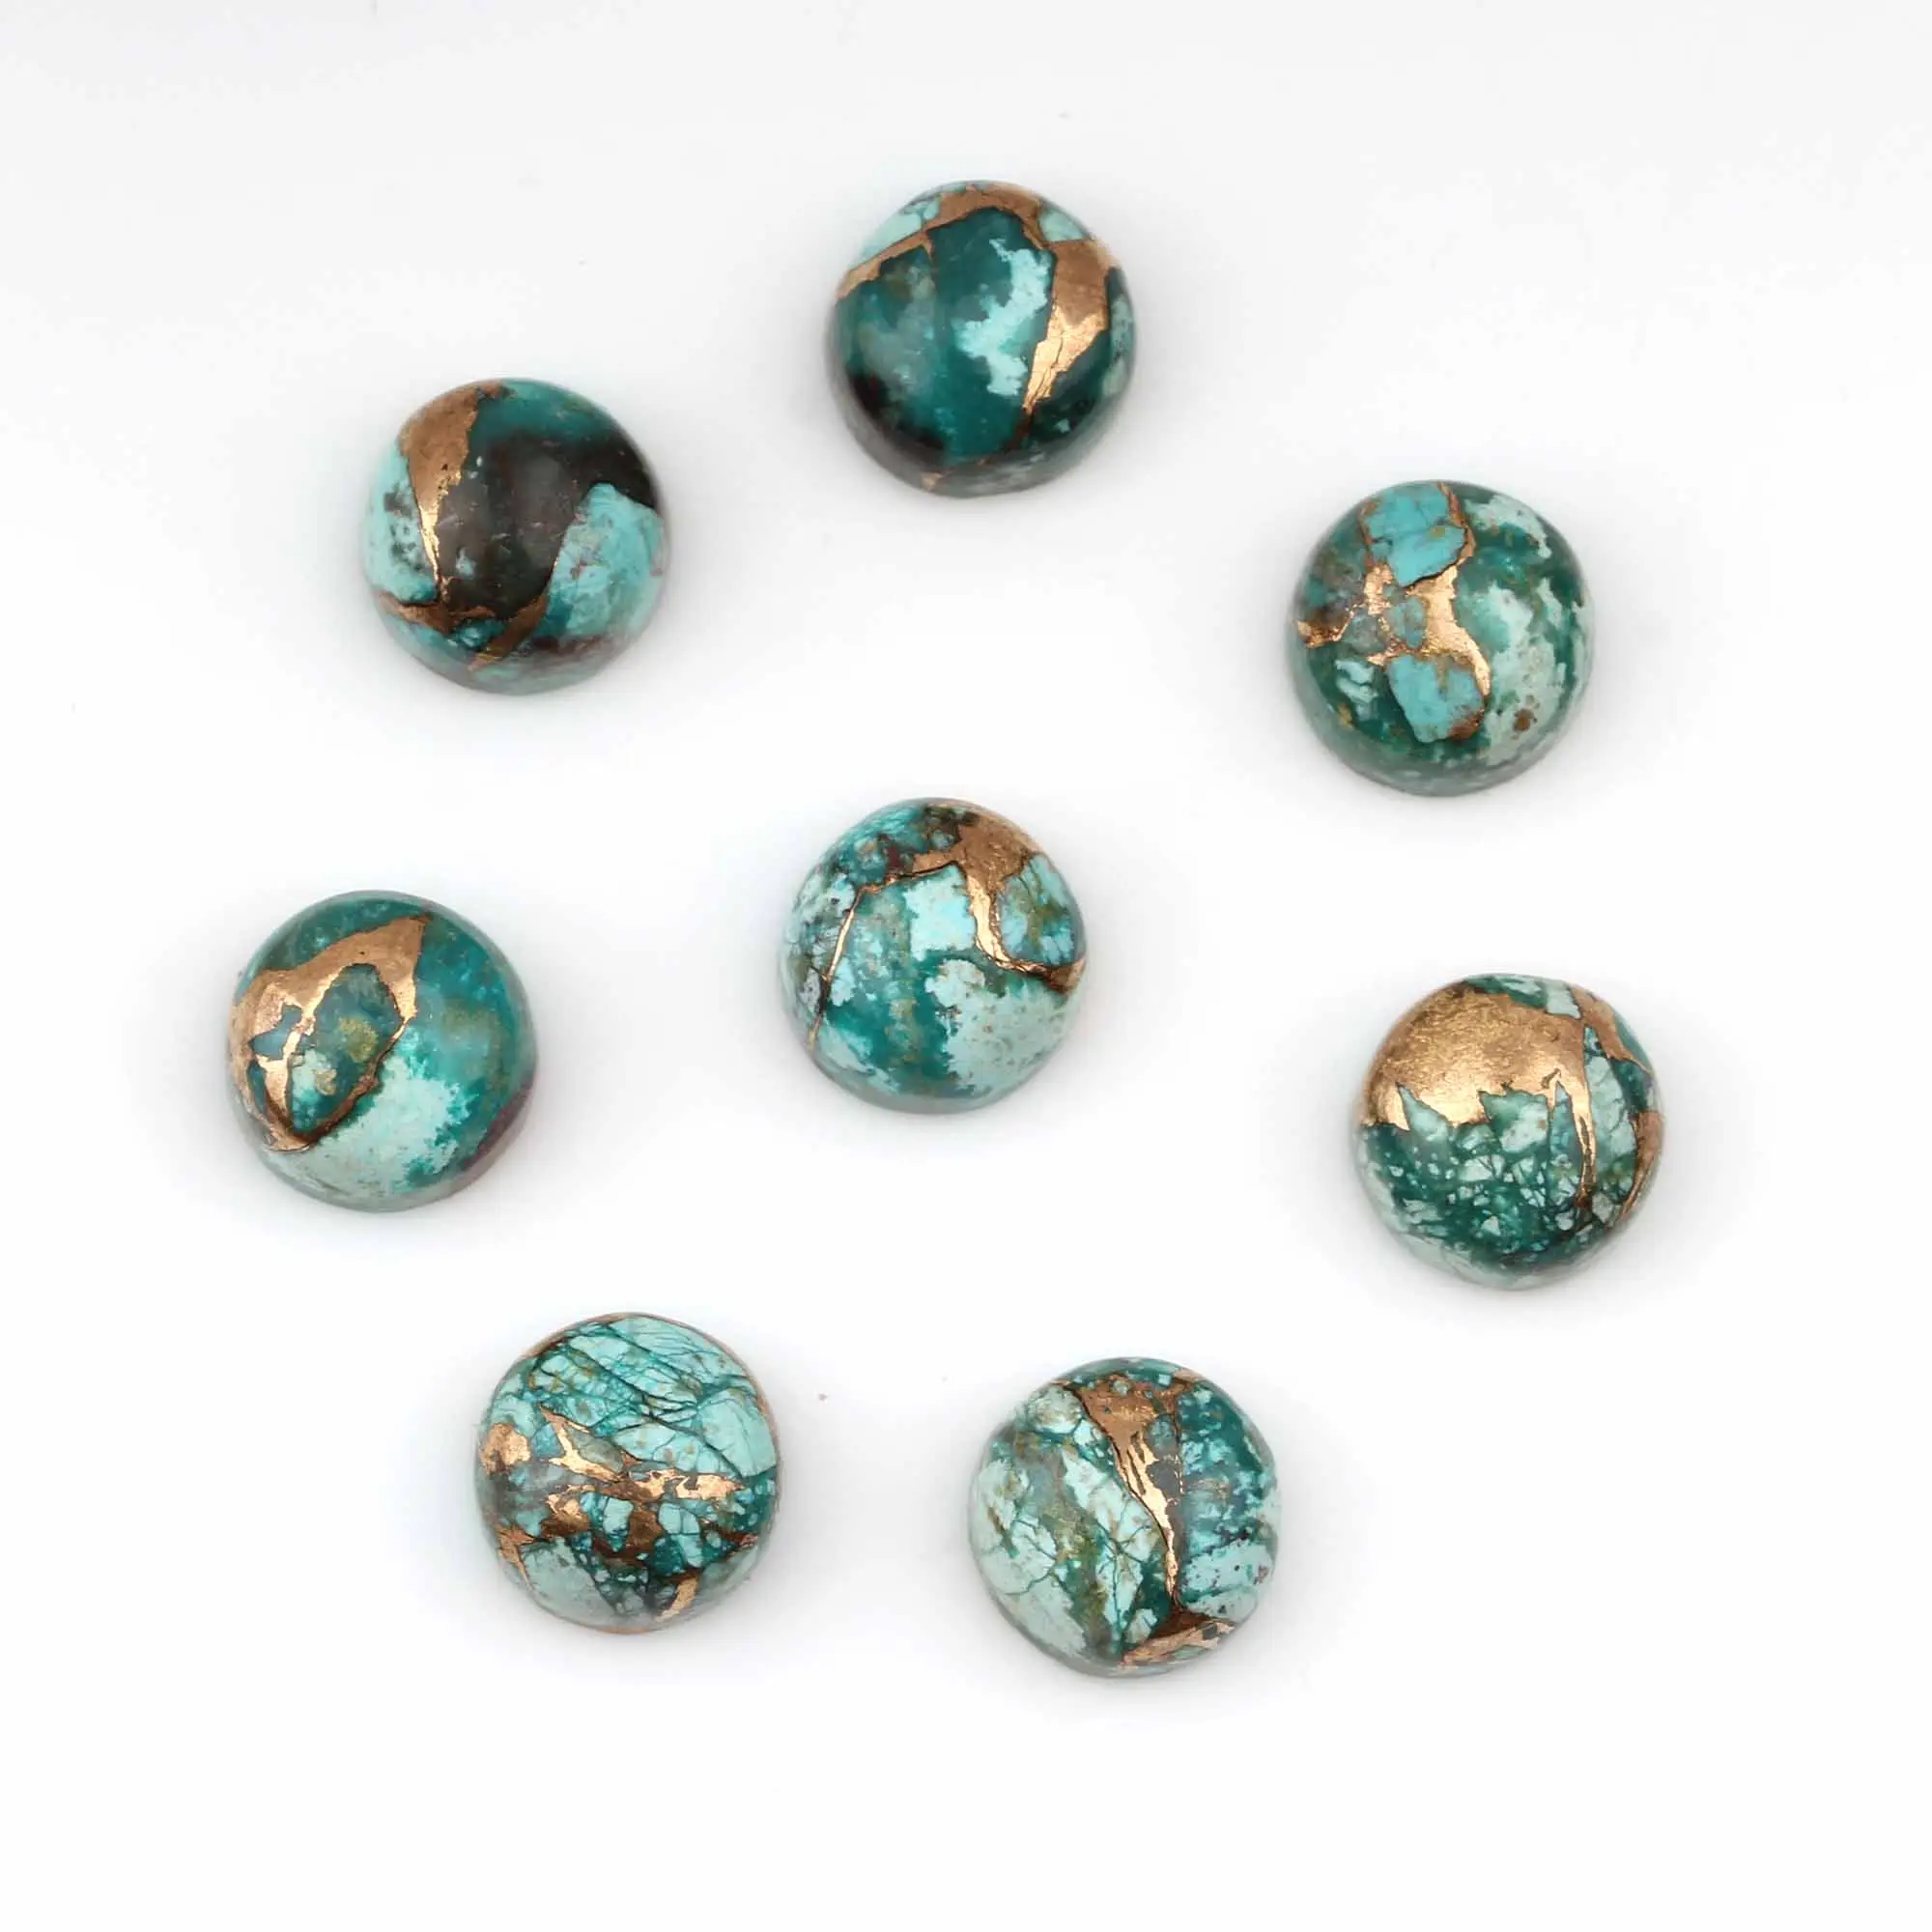 Best Quality Natural 12mm Smooth Round Shape Chrysocolla Copper Loose Gemstone Cabochons For Making Jewelry at Wholesale Price